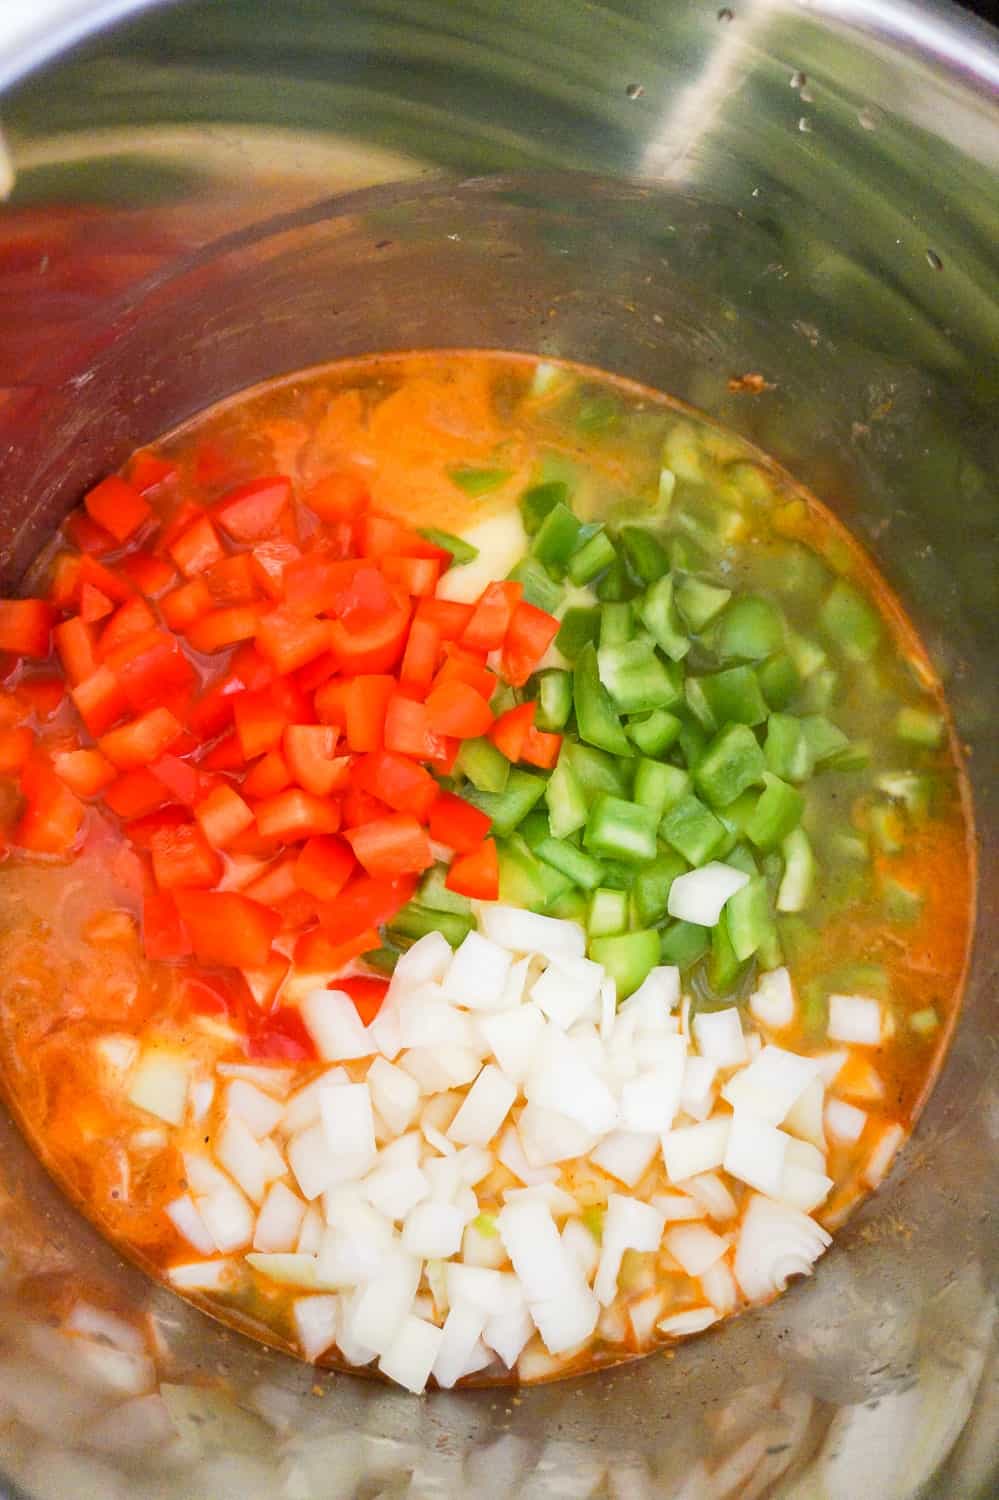 diced red peppers, diced green peppers and diced onions on top of chicken and broth in an Instant Pot